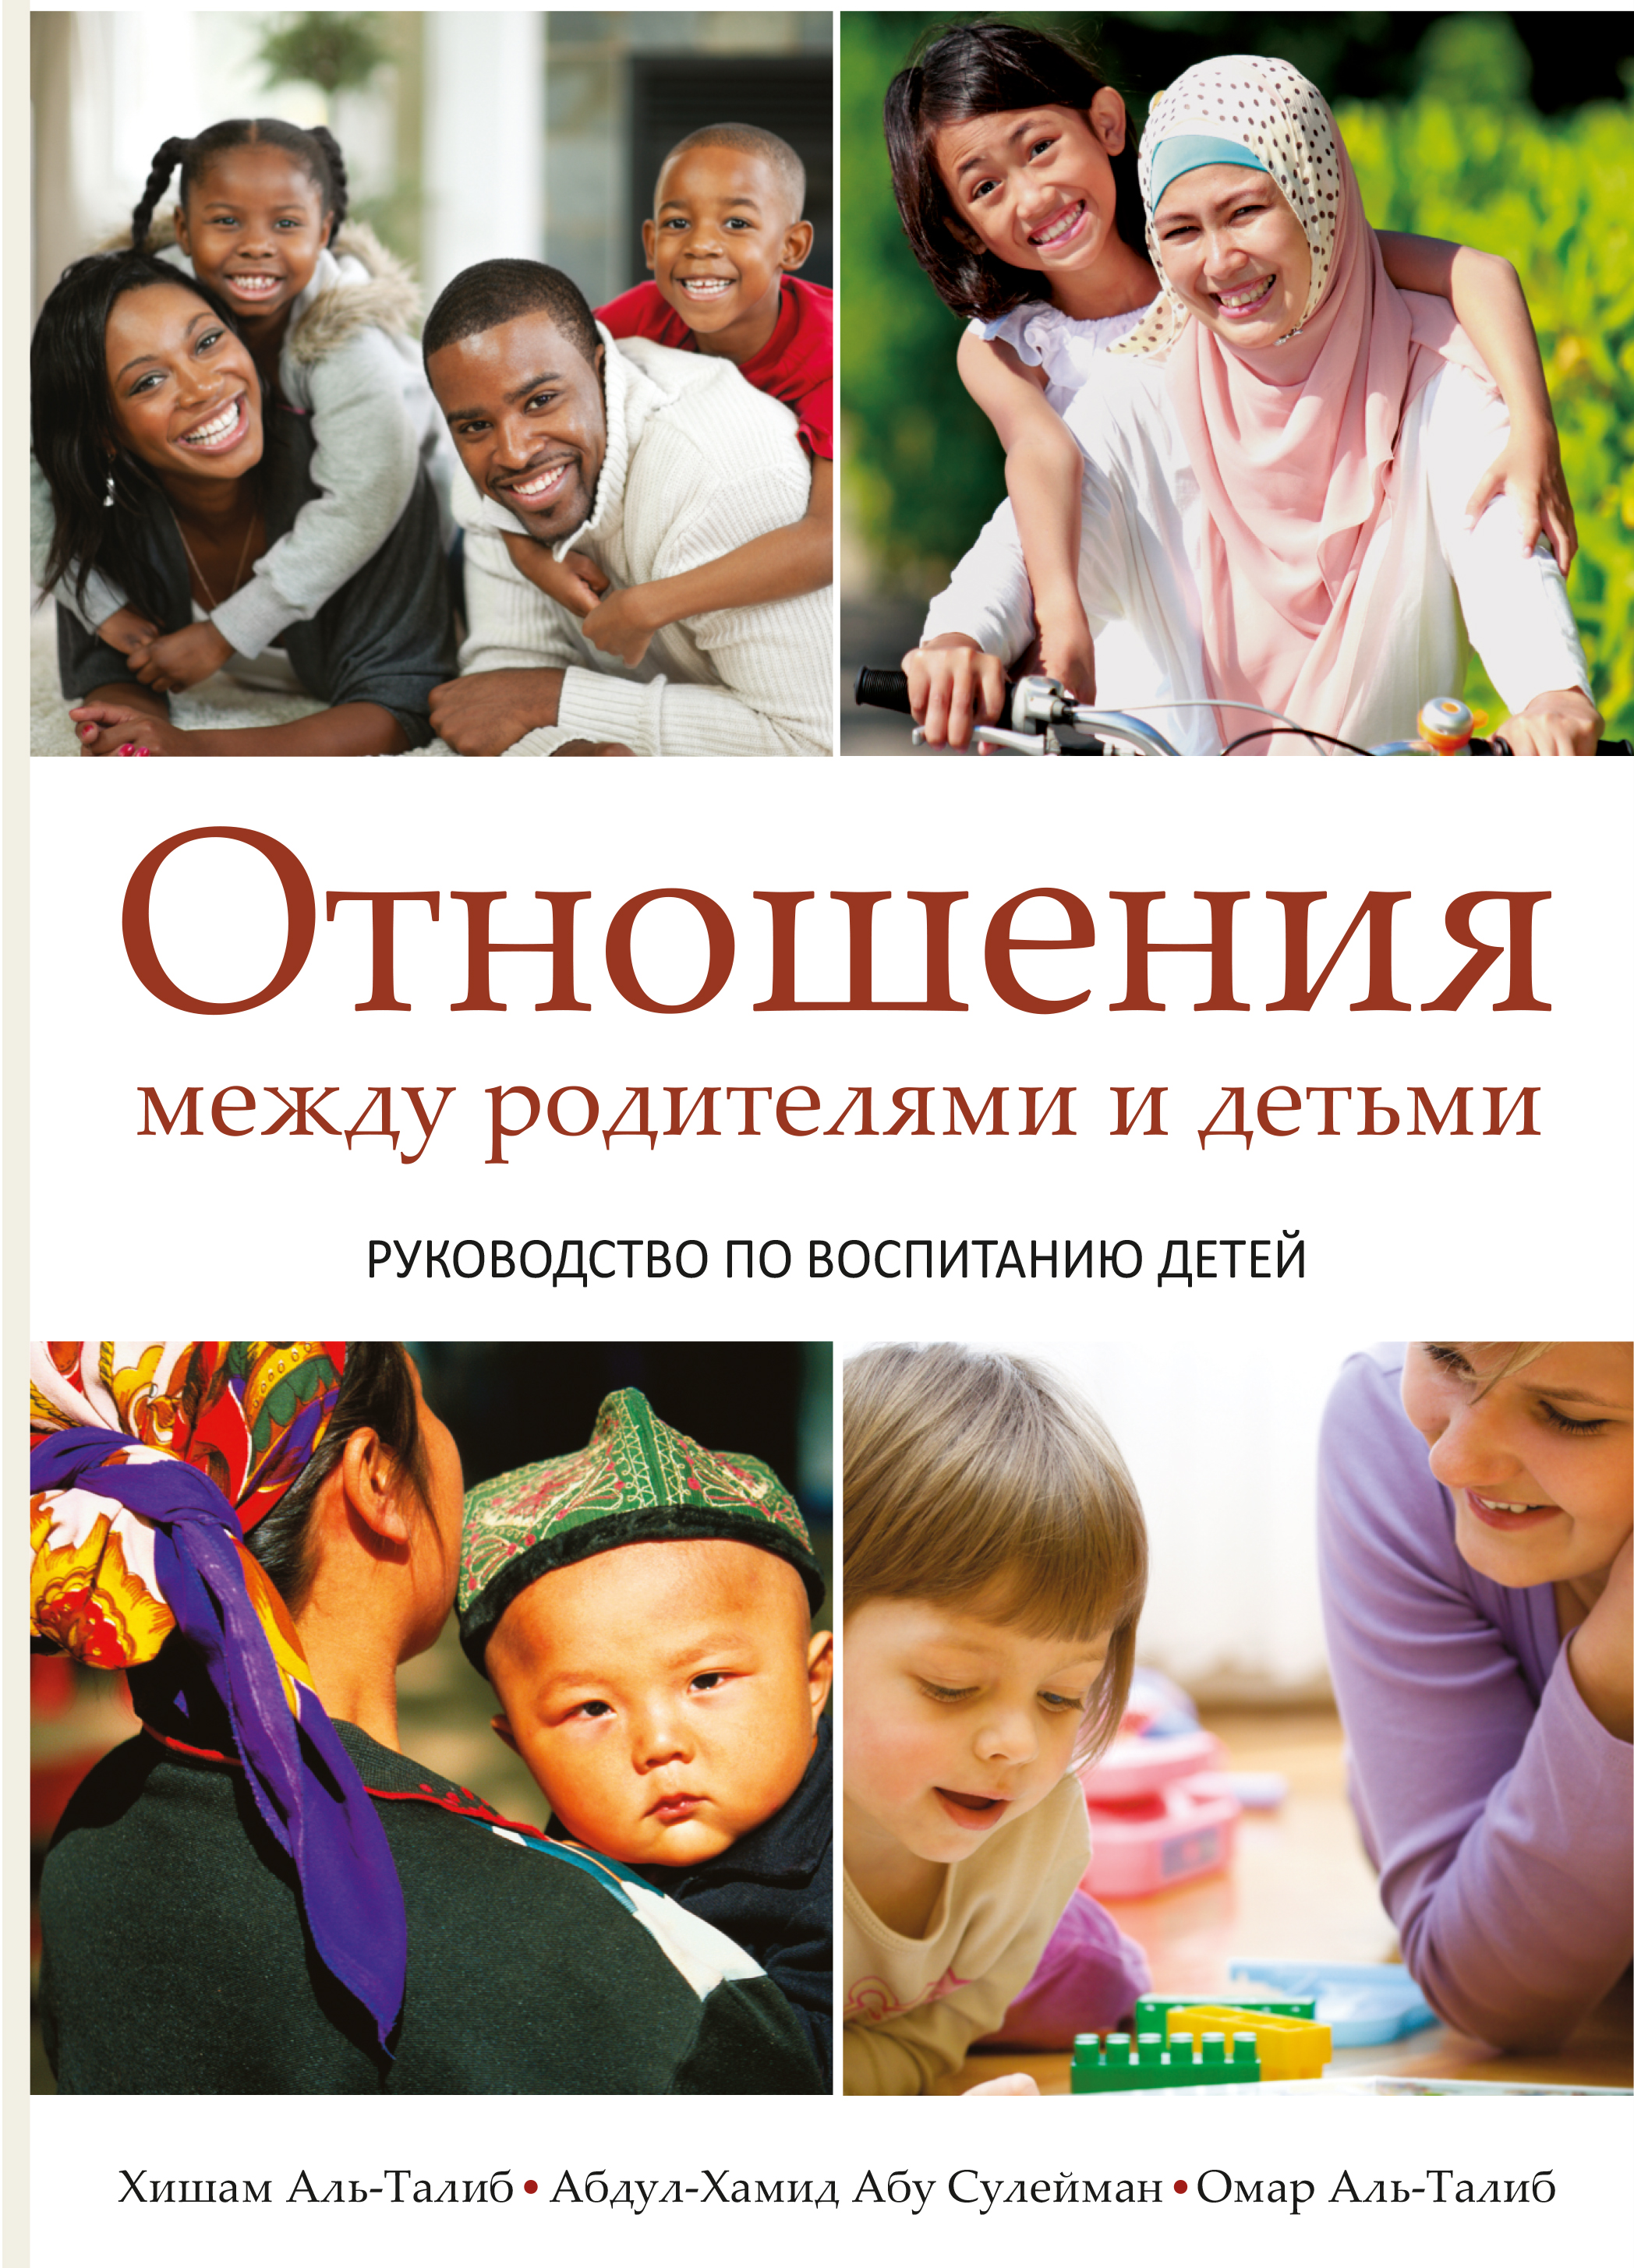 Russian - Parent-Child Relations: A Guide to Raising Children